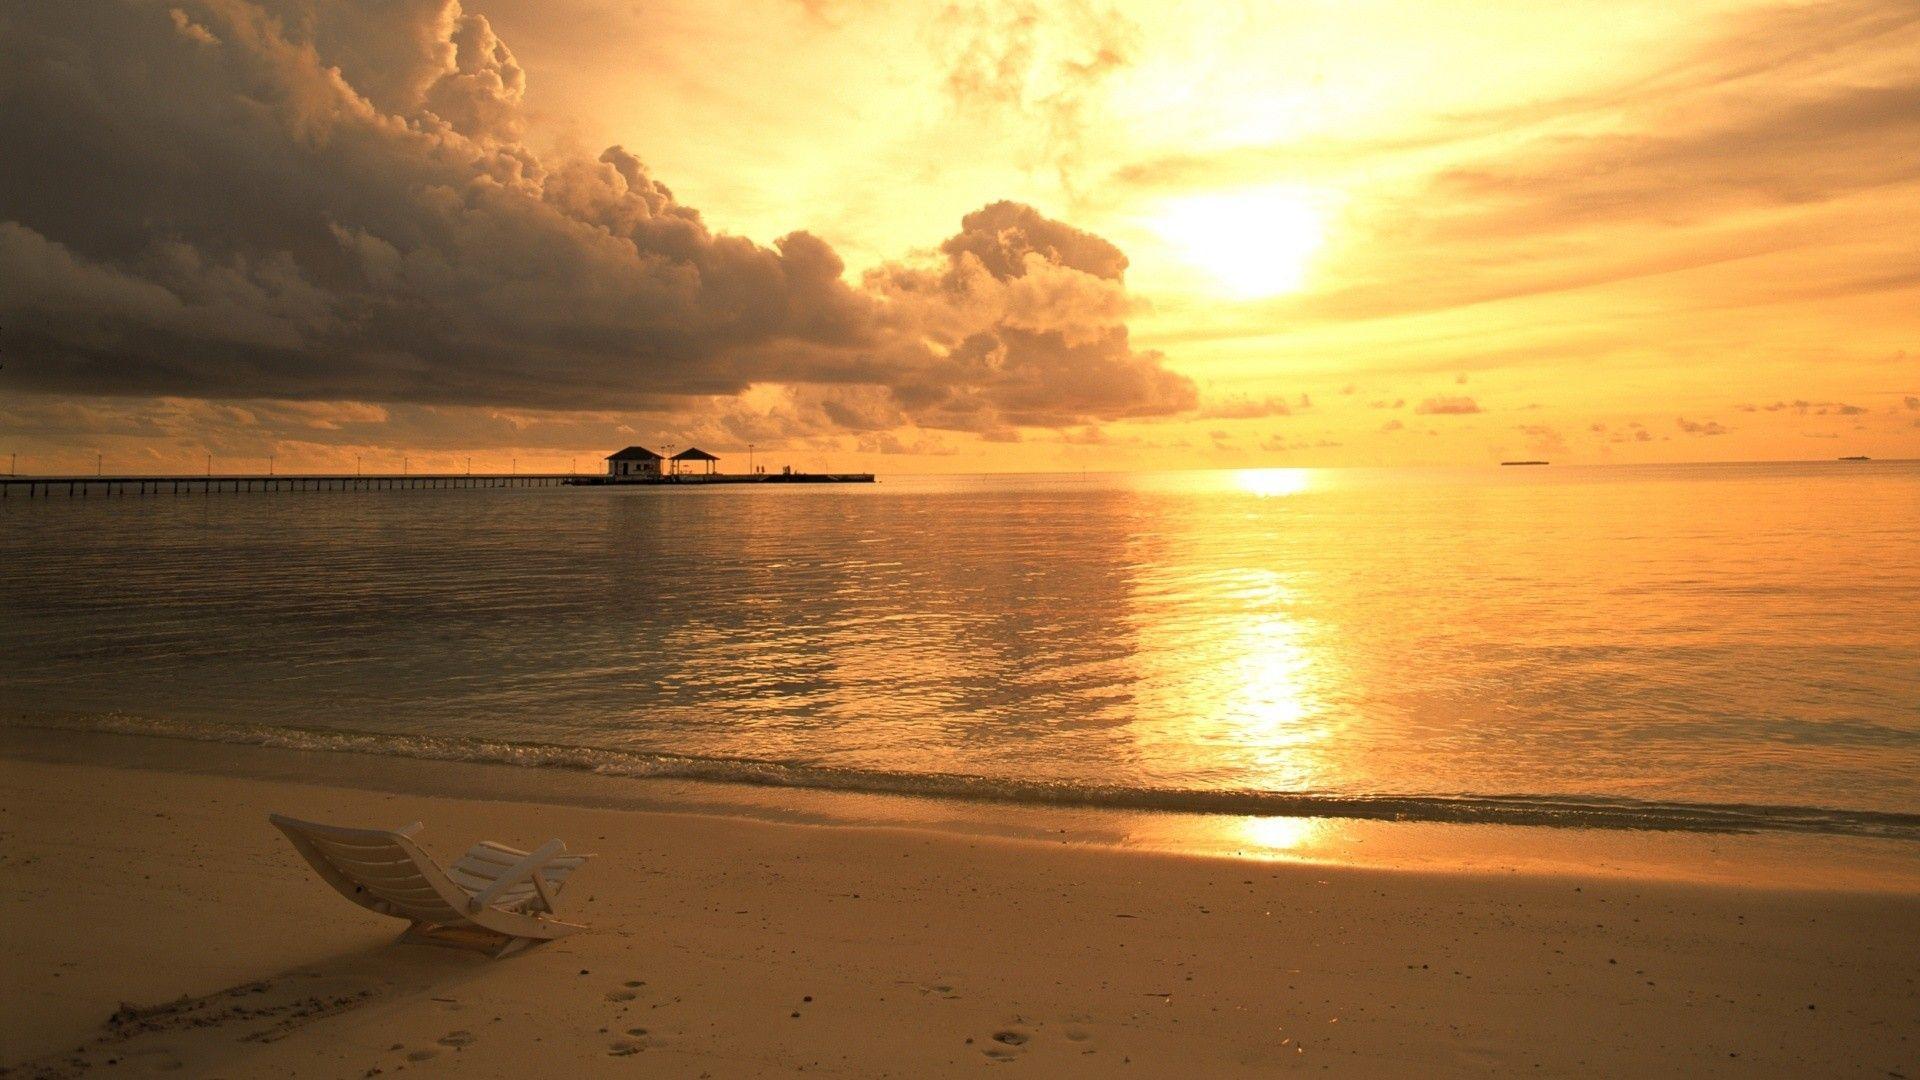 Lonely chaise lounge on the beach at sunset wallpaper and image